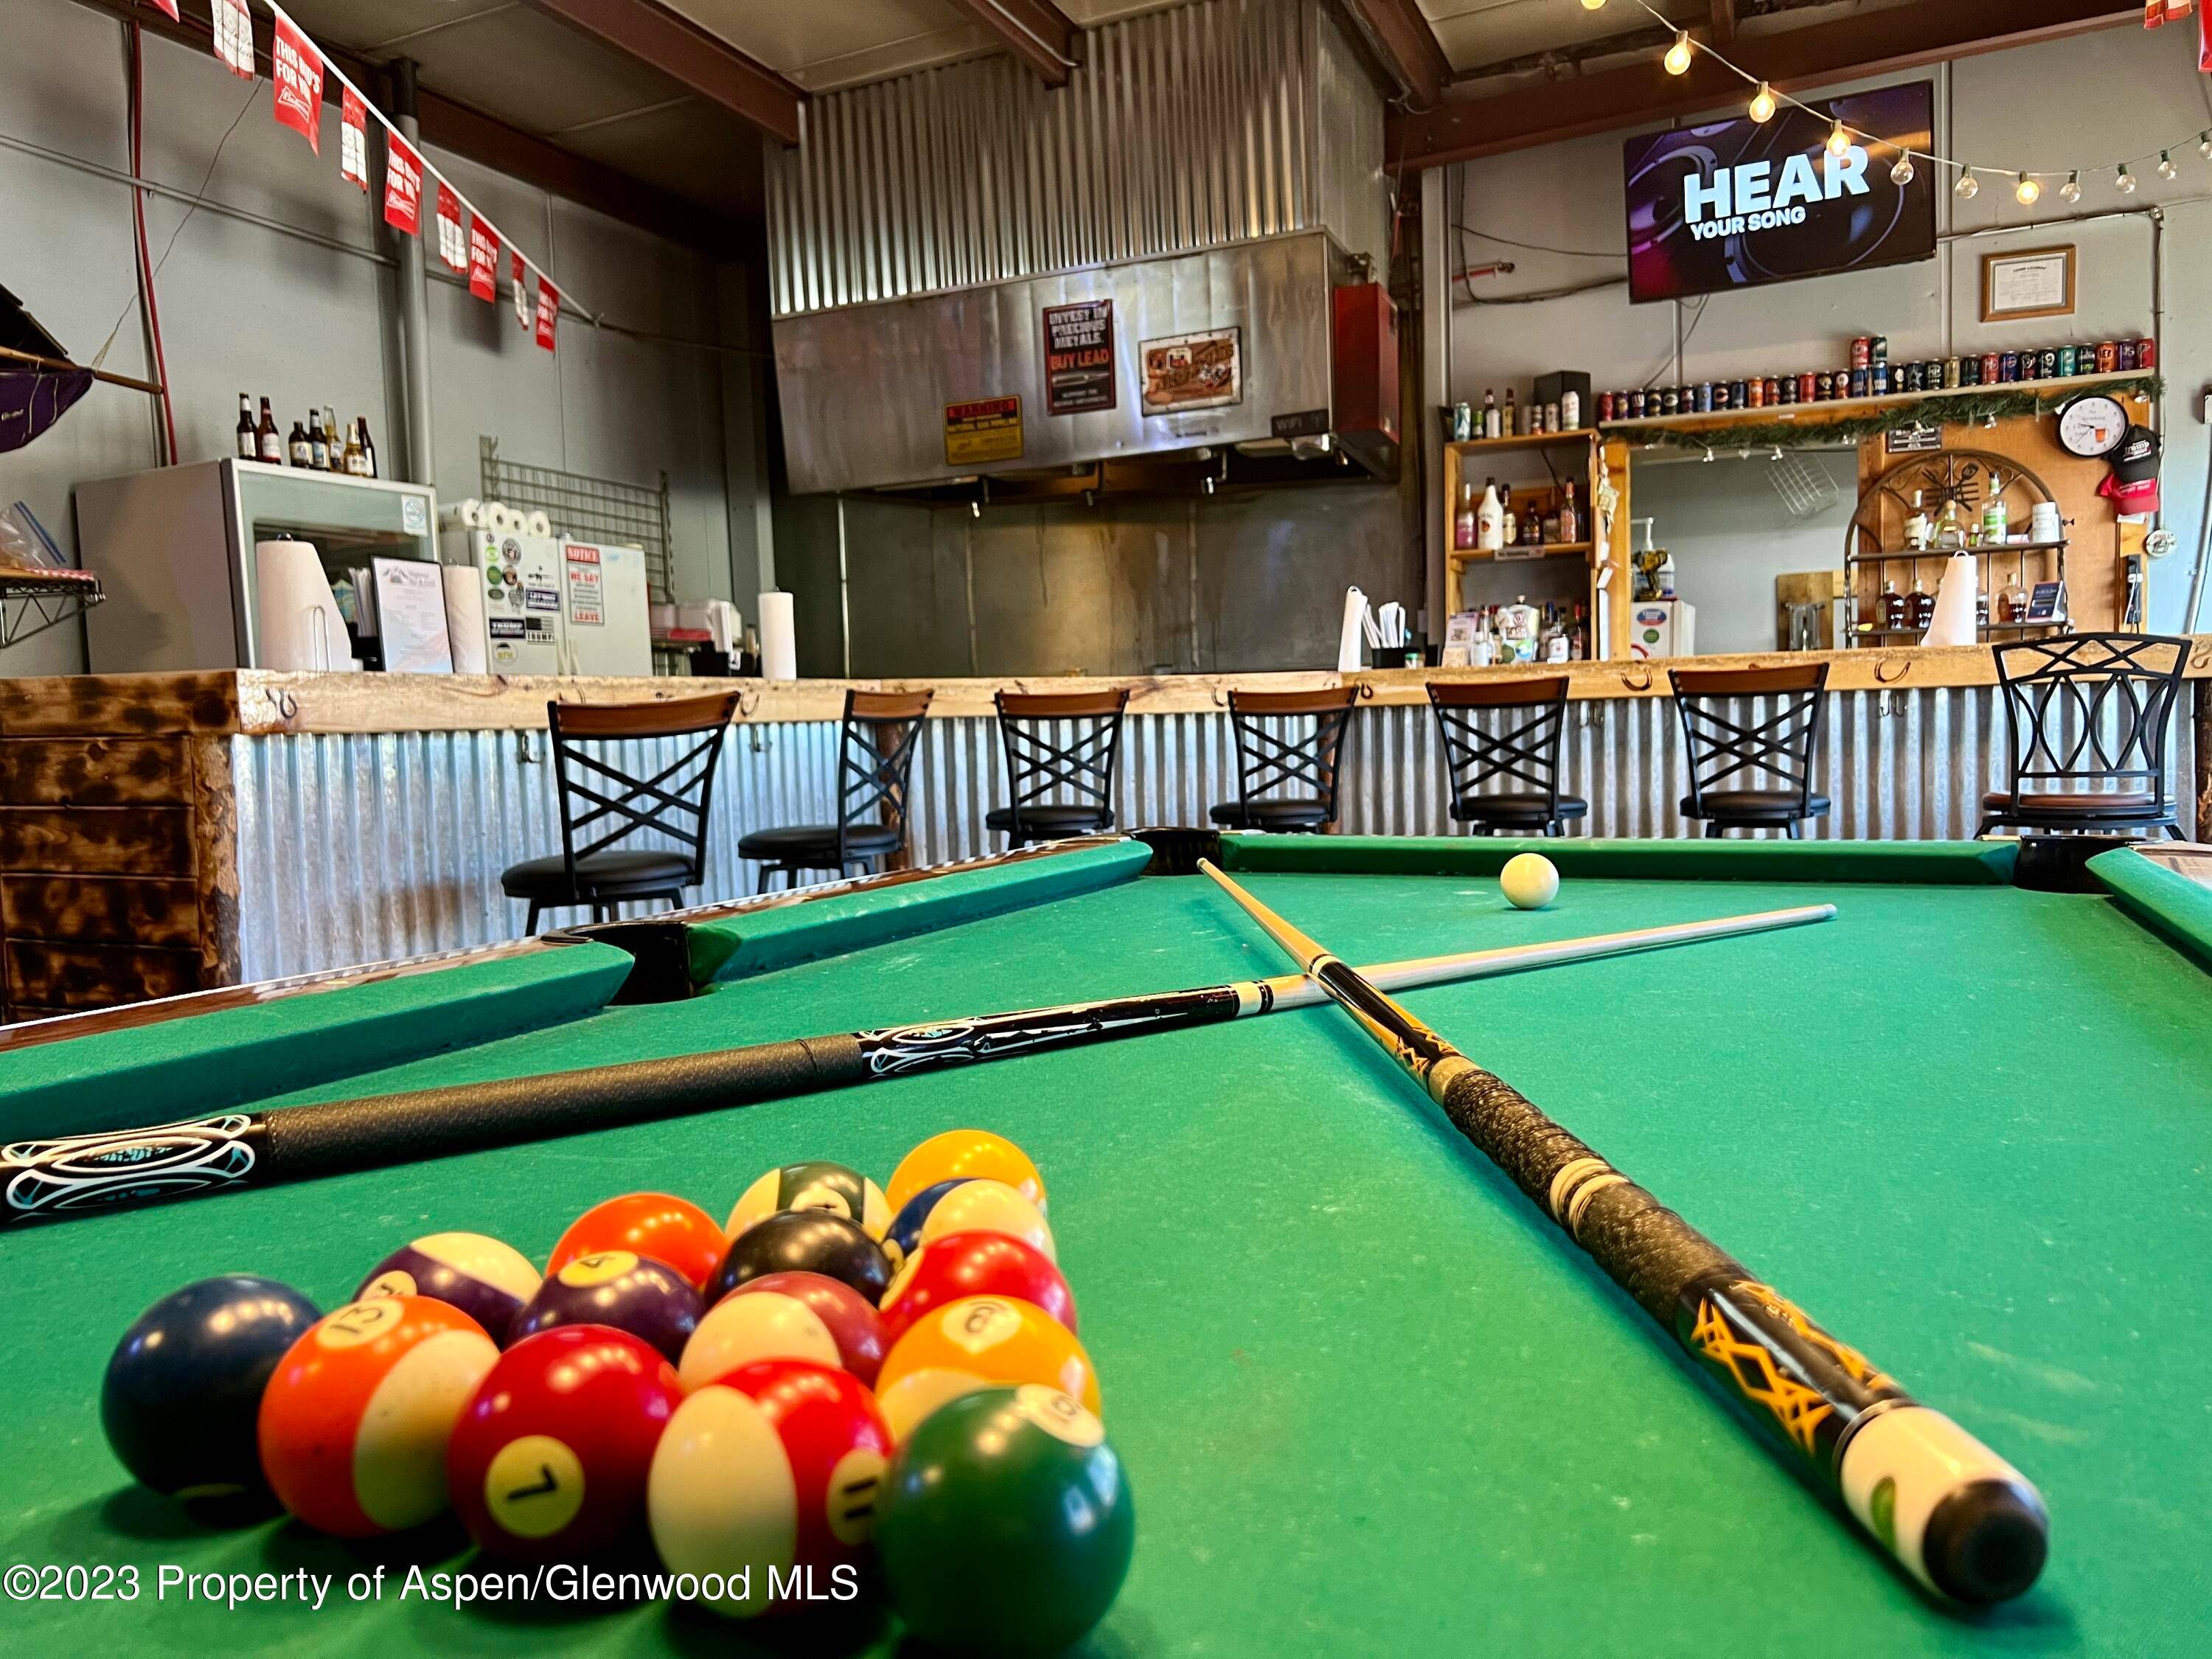 The Highway Bar Grill in Dinosaur Colorado is frequented by tourists and locals alike.